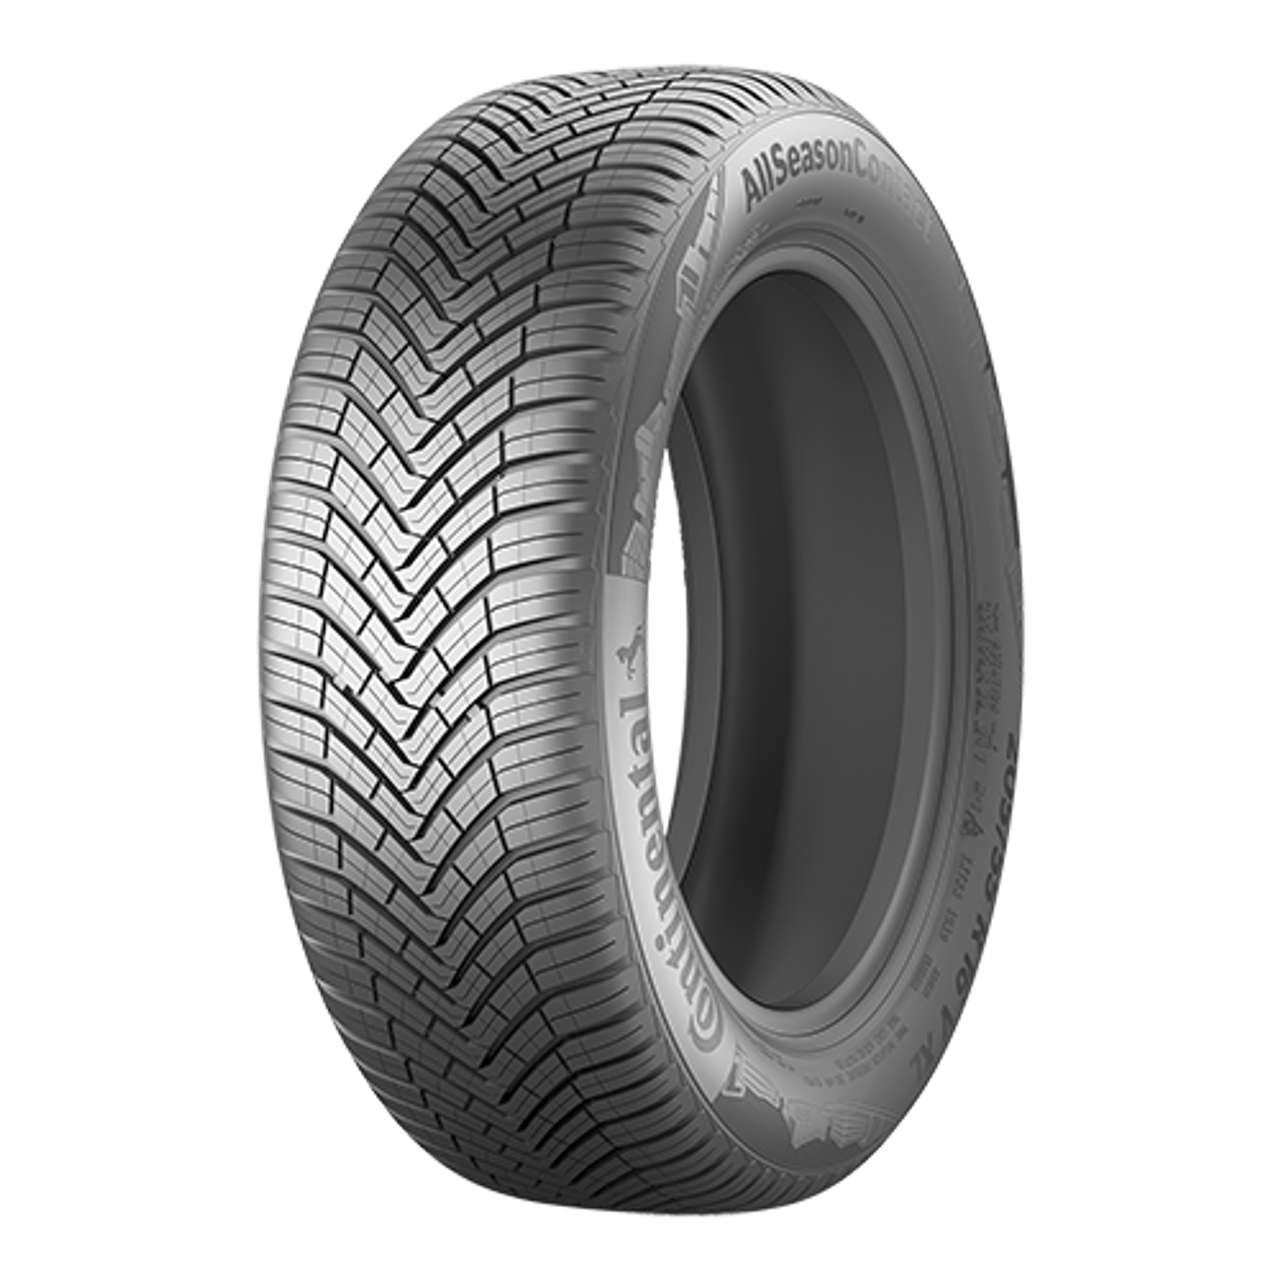 CONTINENTAL ALLSEASONCONTACT (AO) (EVc) 235/55R18 100V BSW